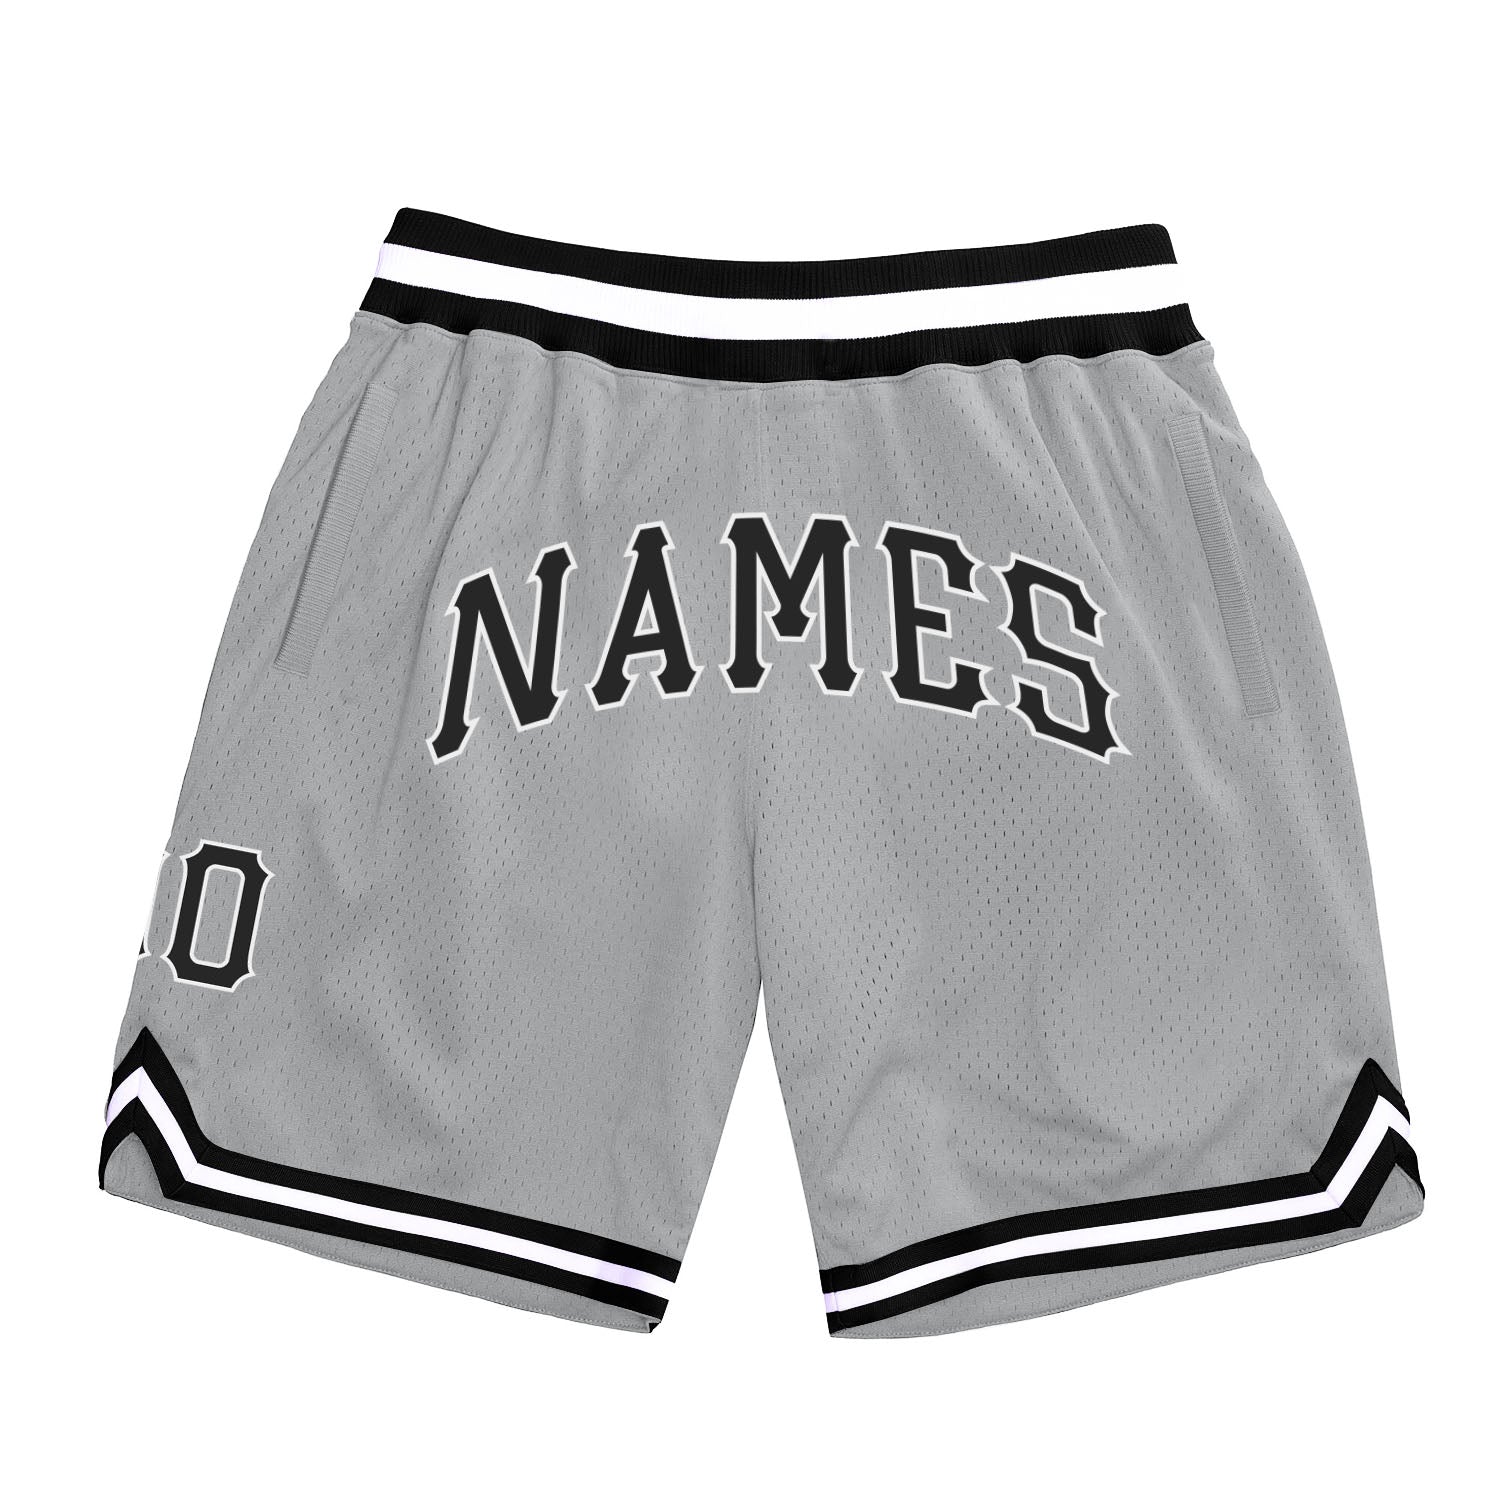 Supreme Basketball Jersey XL black, gray, silver, white. with matching  shorts.